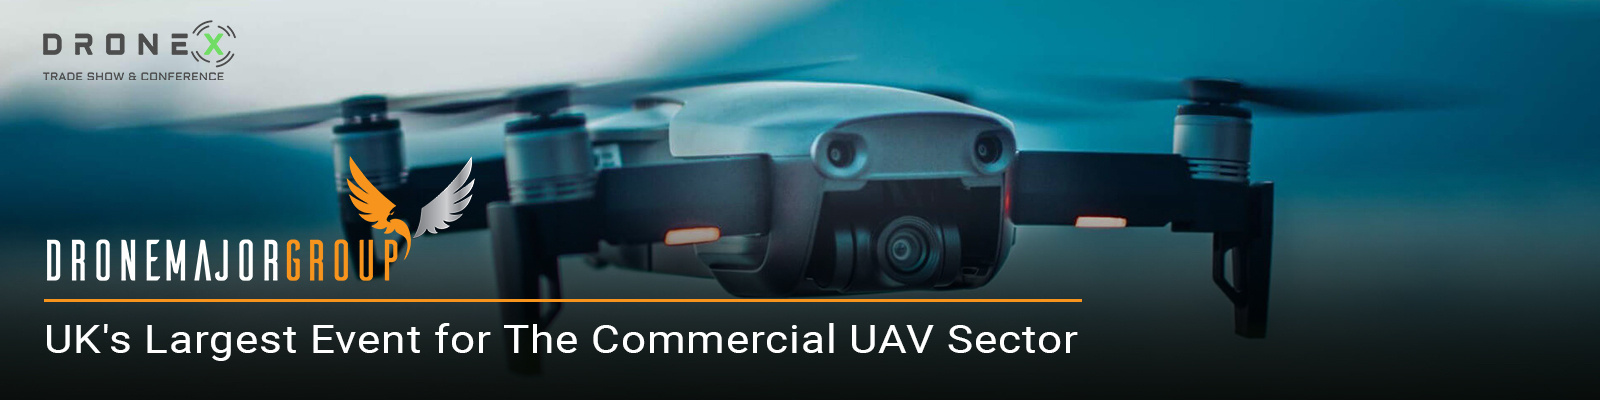 UK's Largest Event for The Commercial UAV Sector